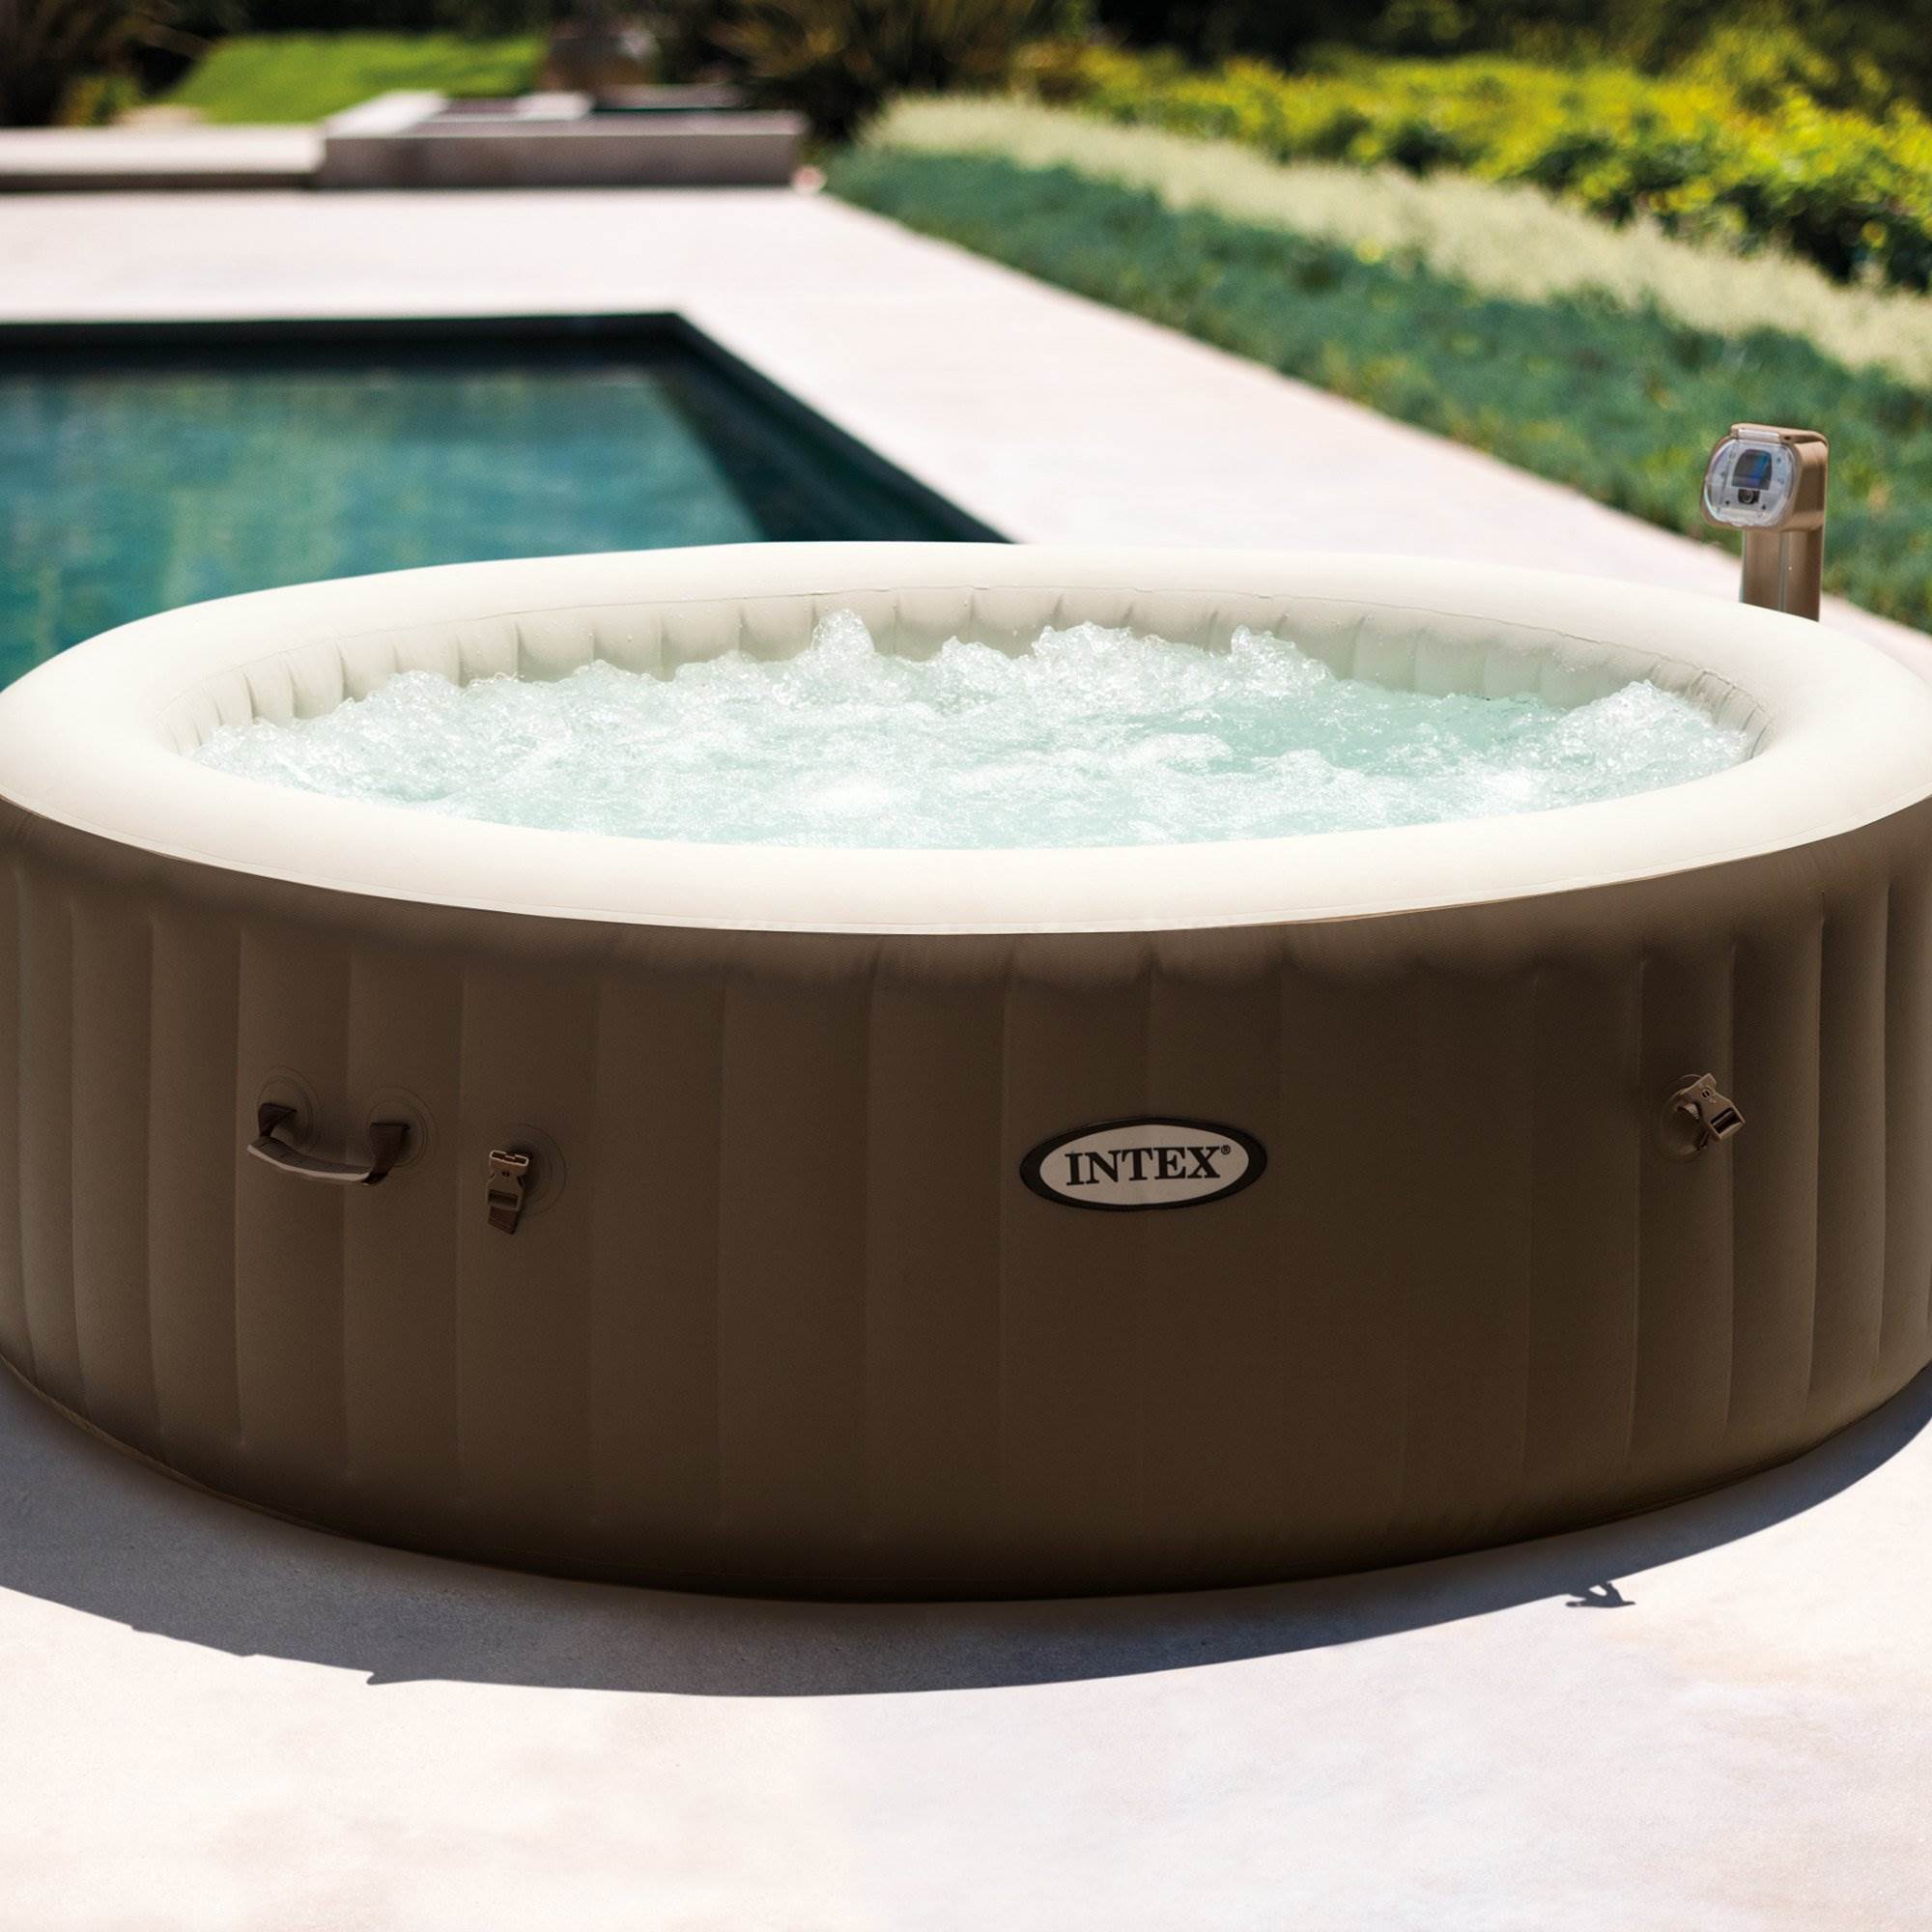 Intex Purespa 6 Person Inflatable Spa Portable Hot Tub With Cupholder And Headrest 78257324804 Ebay